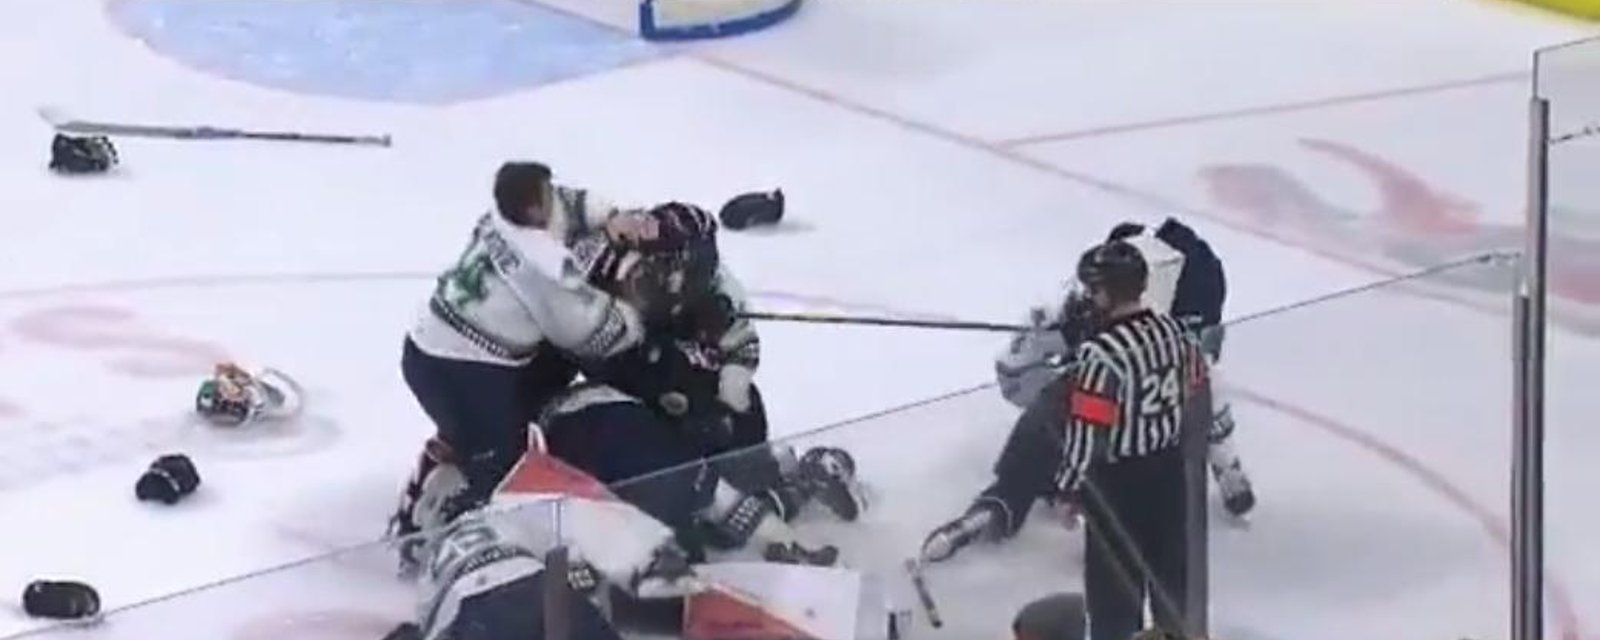 Massive line brawl in Florida after intense game! 